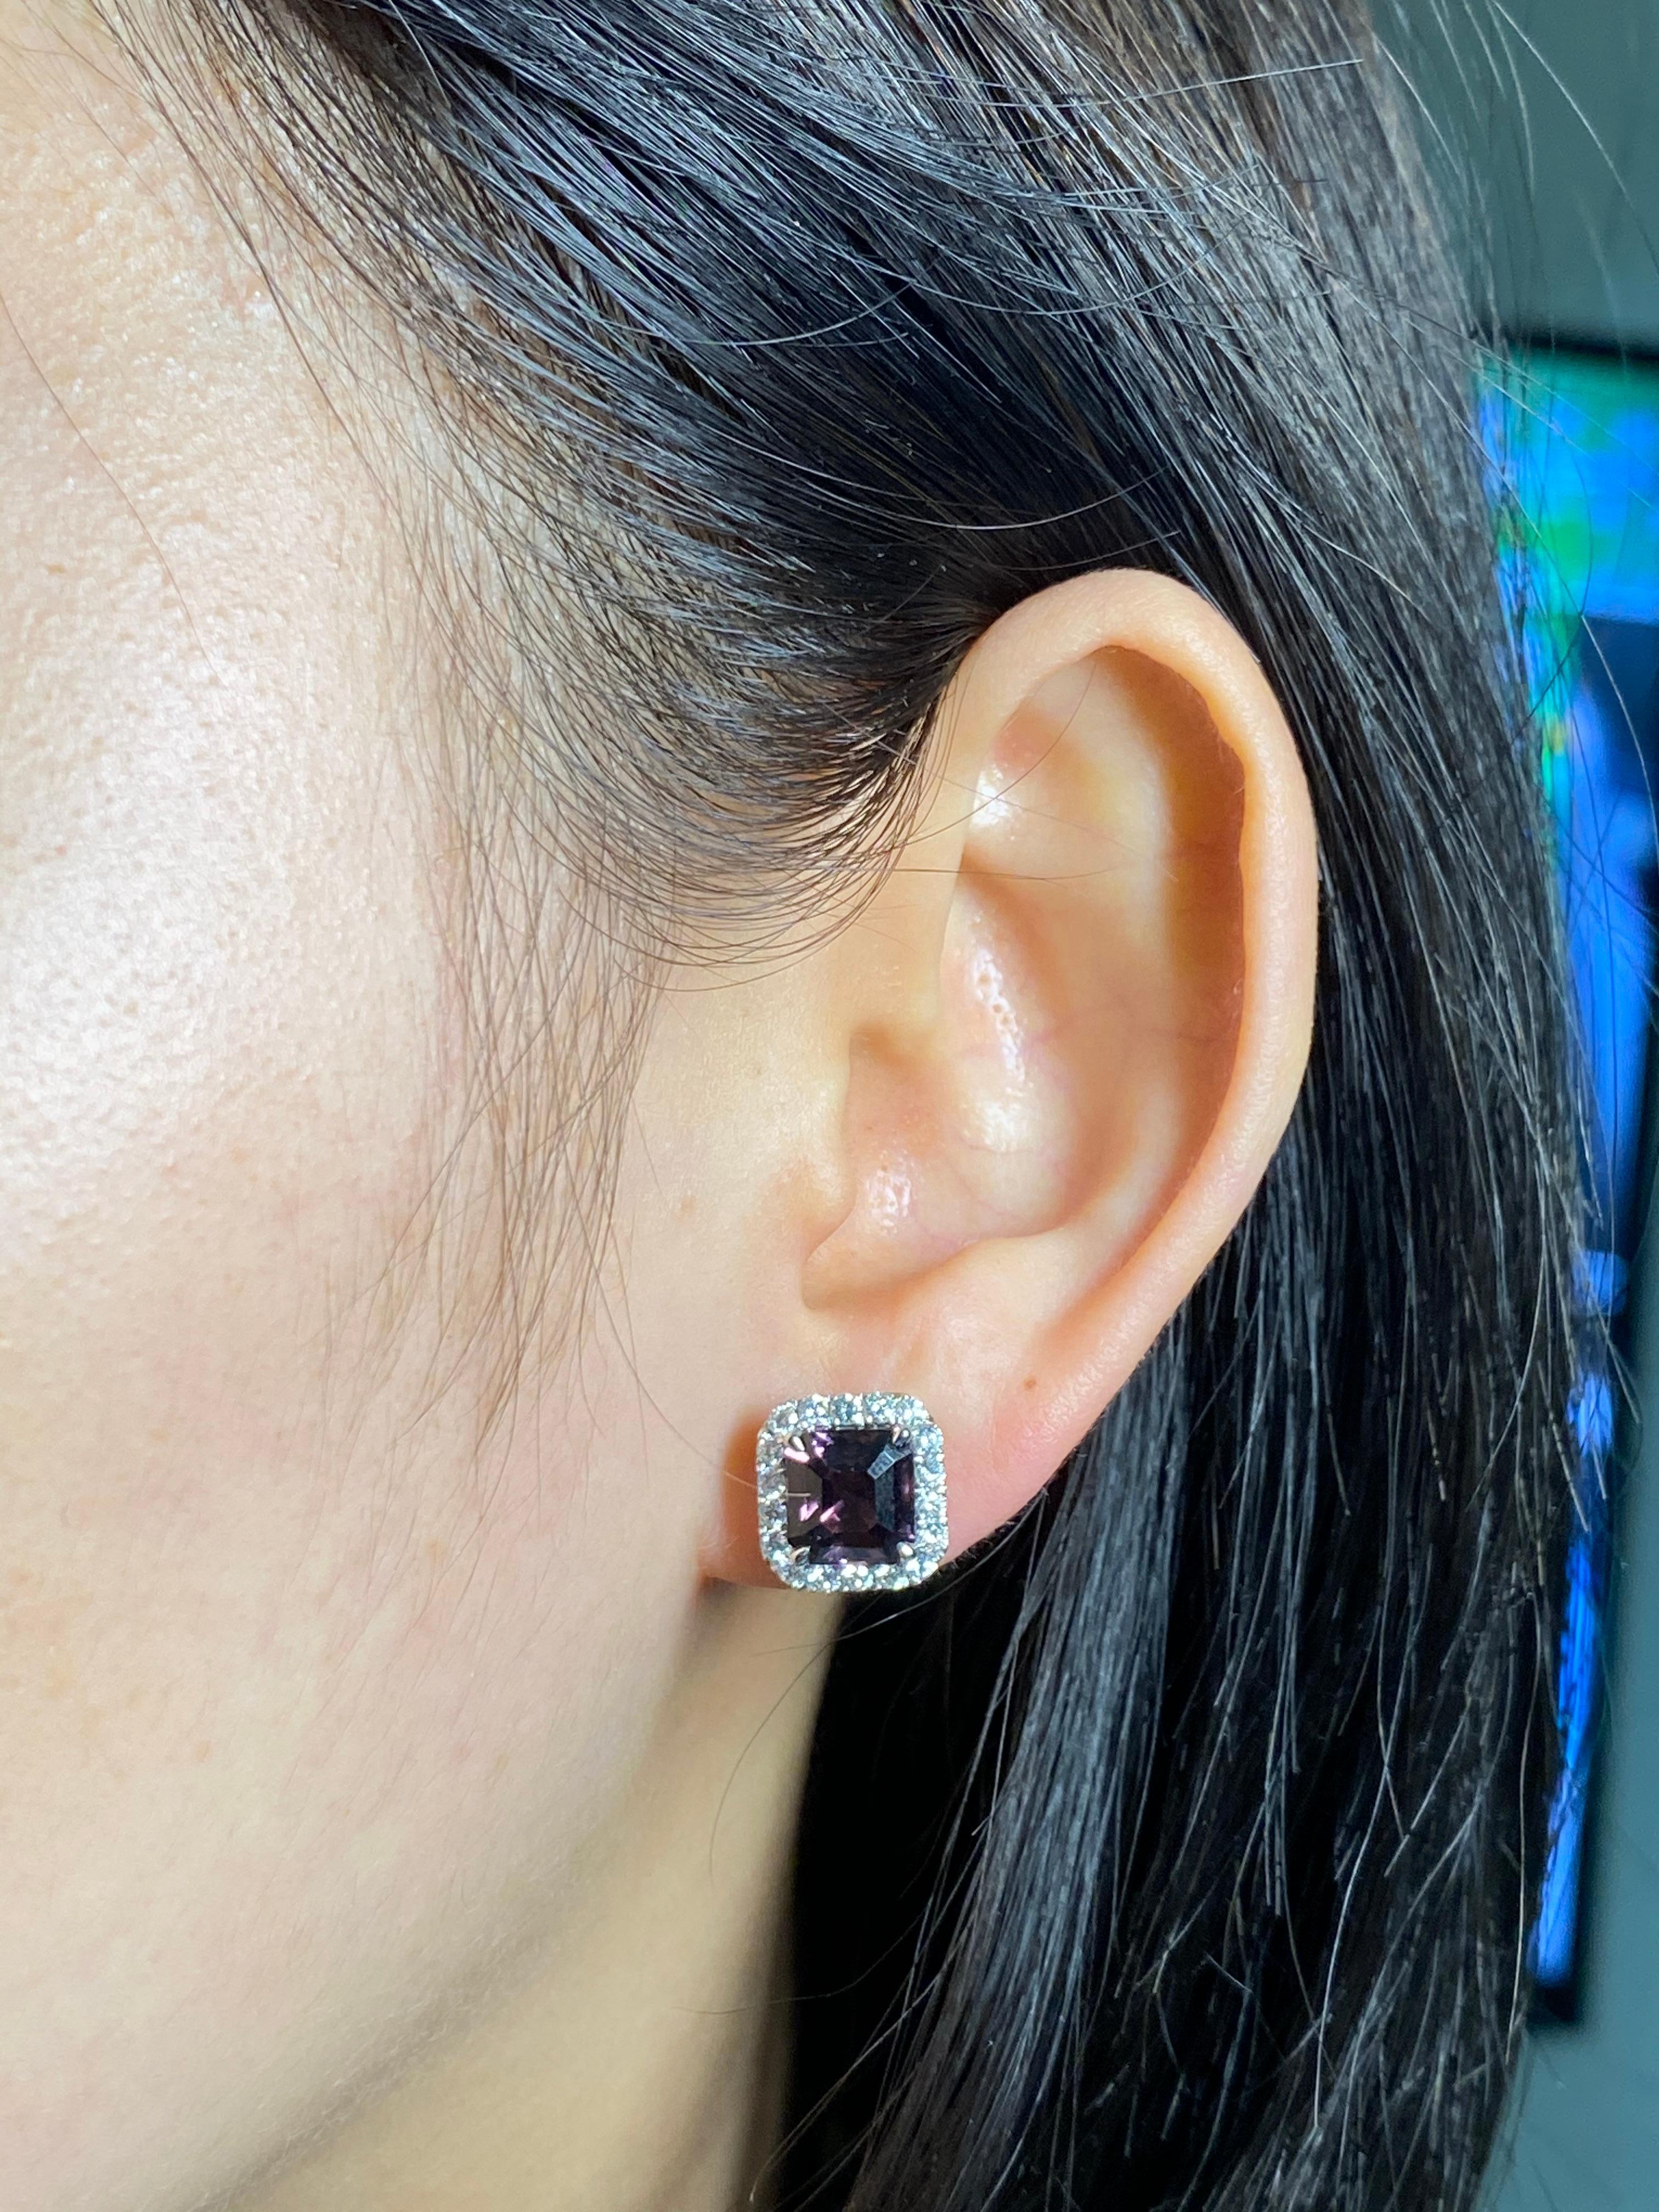 Here is a pair of purple Asscher step cut spinel and diamond halo earrings. The earrings are set in 18k white gold and diamonds. The 0.67 Cts of full cut diamonds are of high quality. Two natural spinels about 2.36 cts each totaling 4.73 cts make up